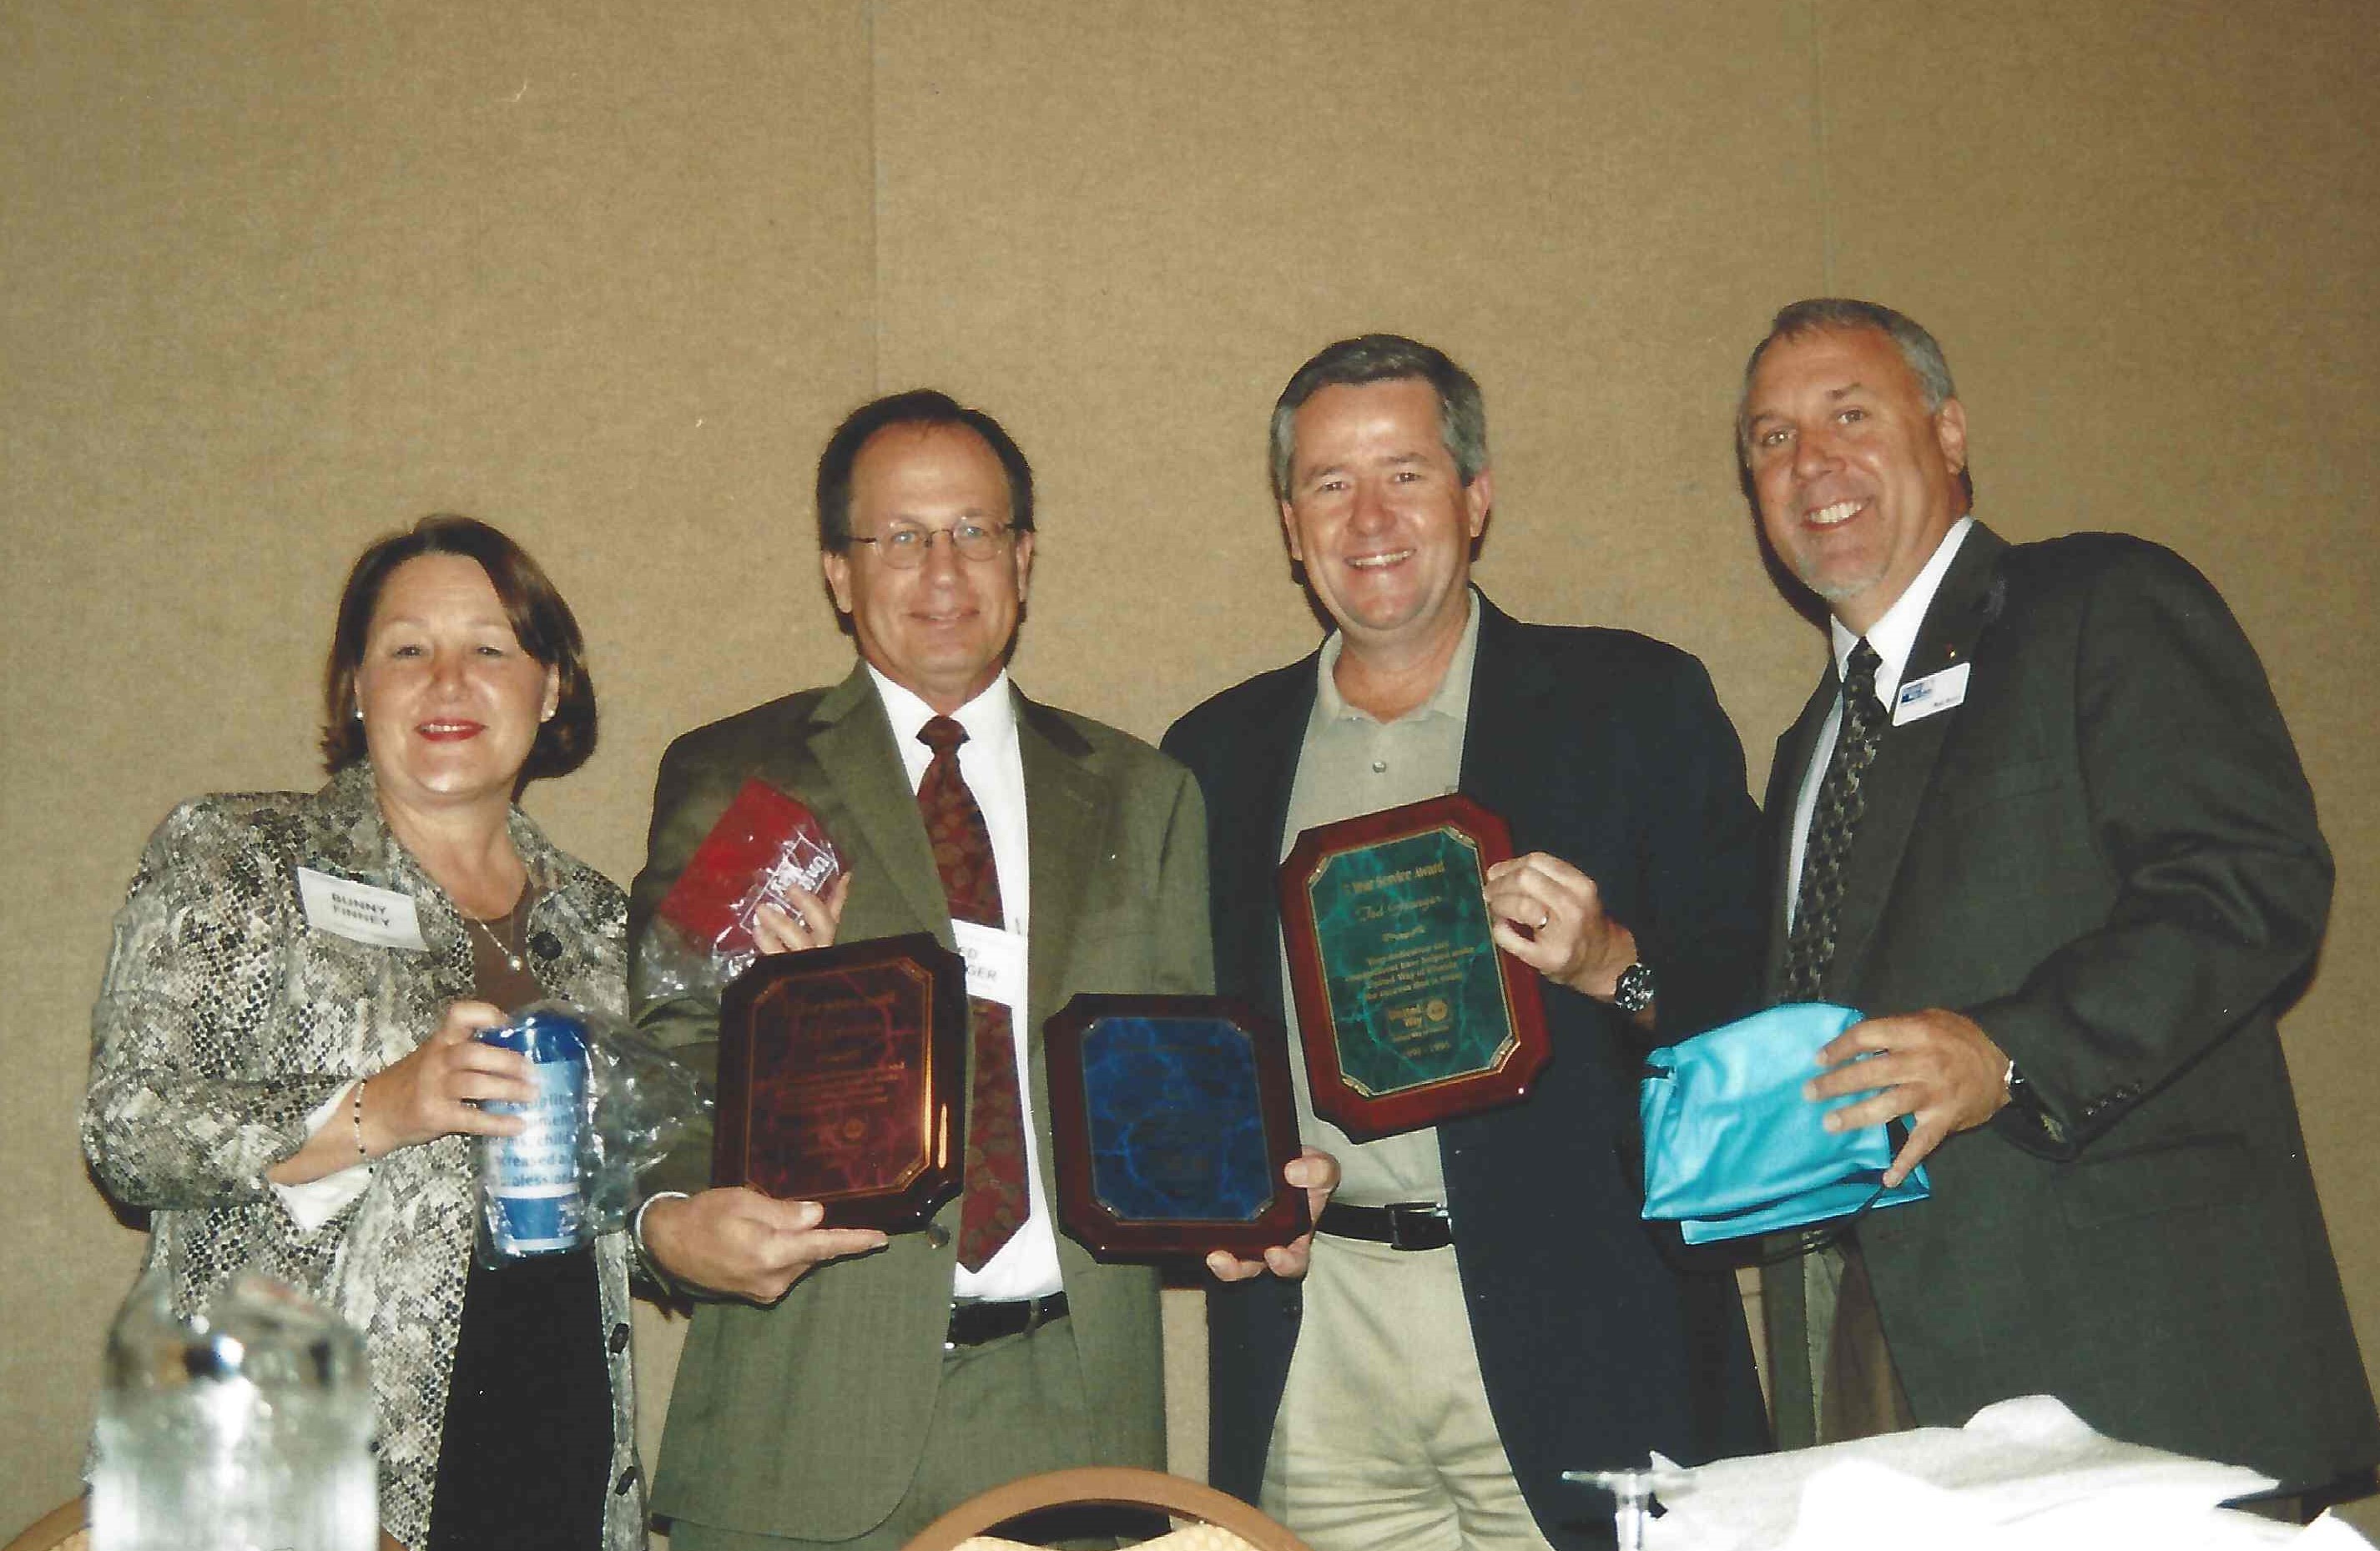 2005 Bunny Finney, Ted Granger, Brian Gallagher, Rob Rains (UWW Conference)